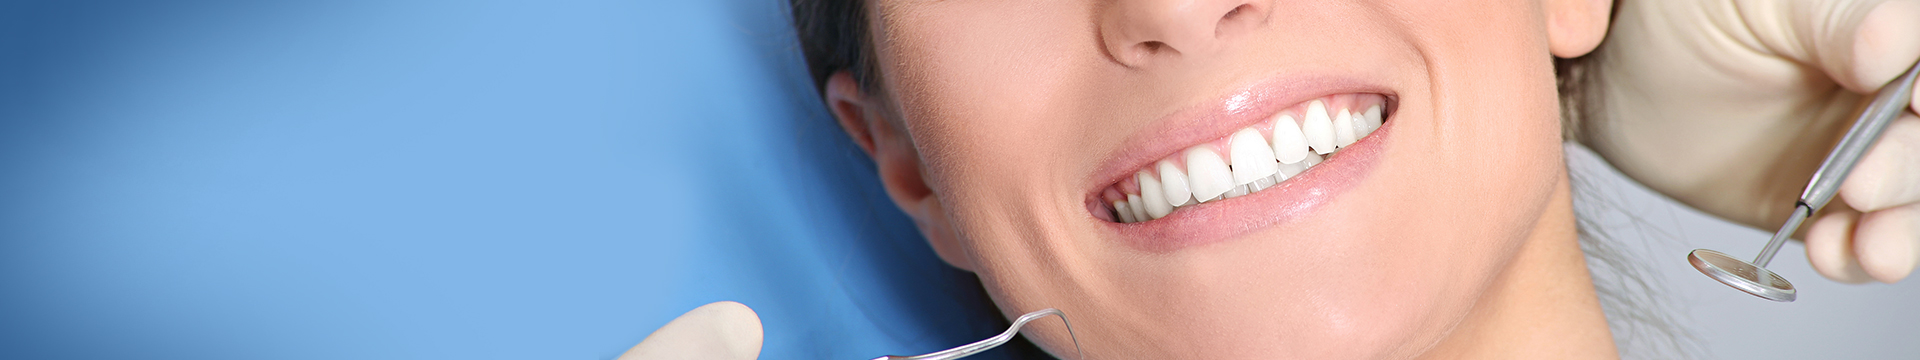 Cropped image of woman's smile receiving dental cleaning and exam